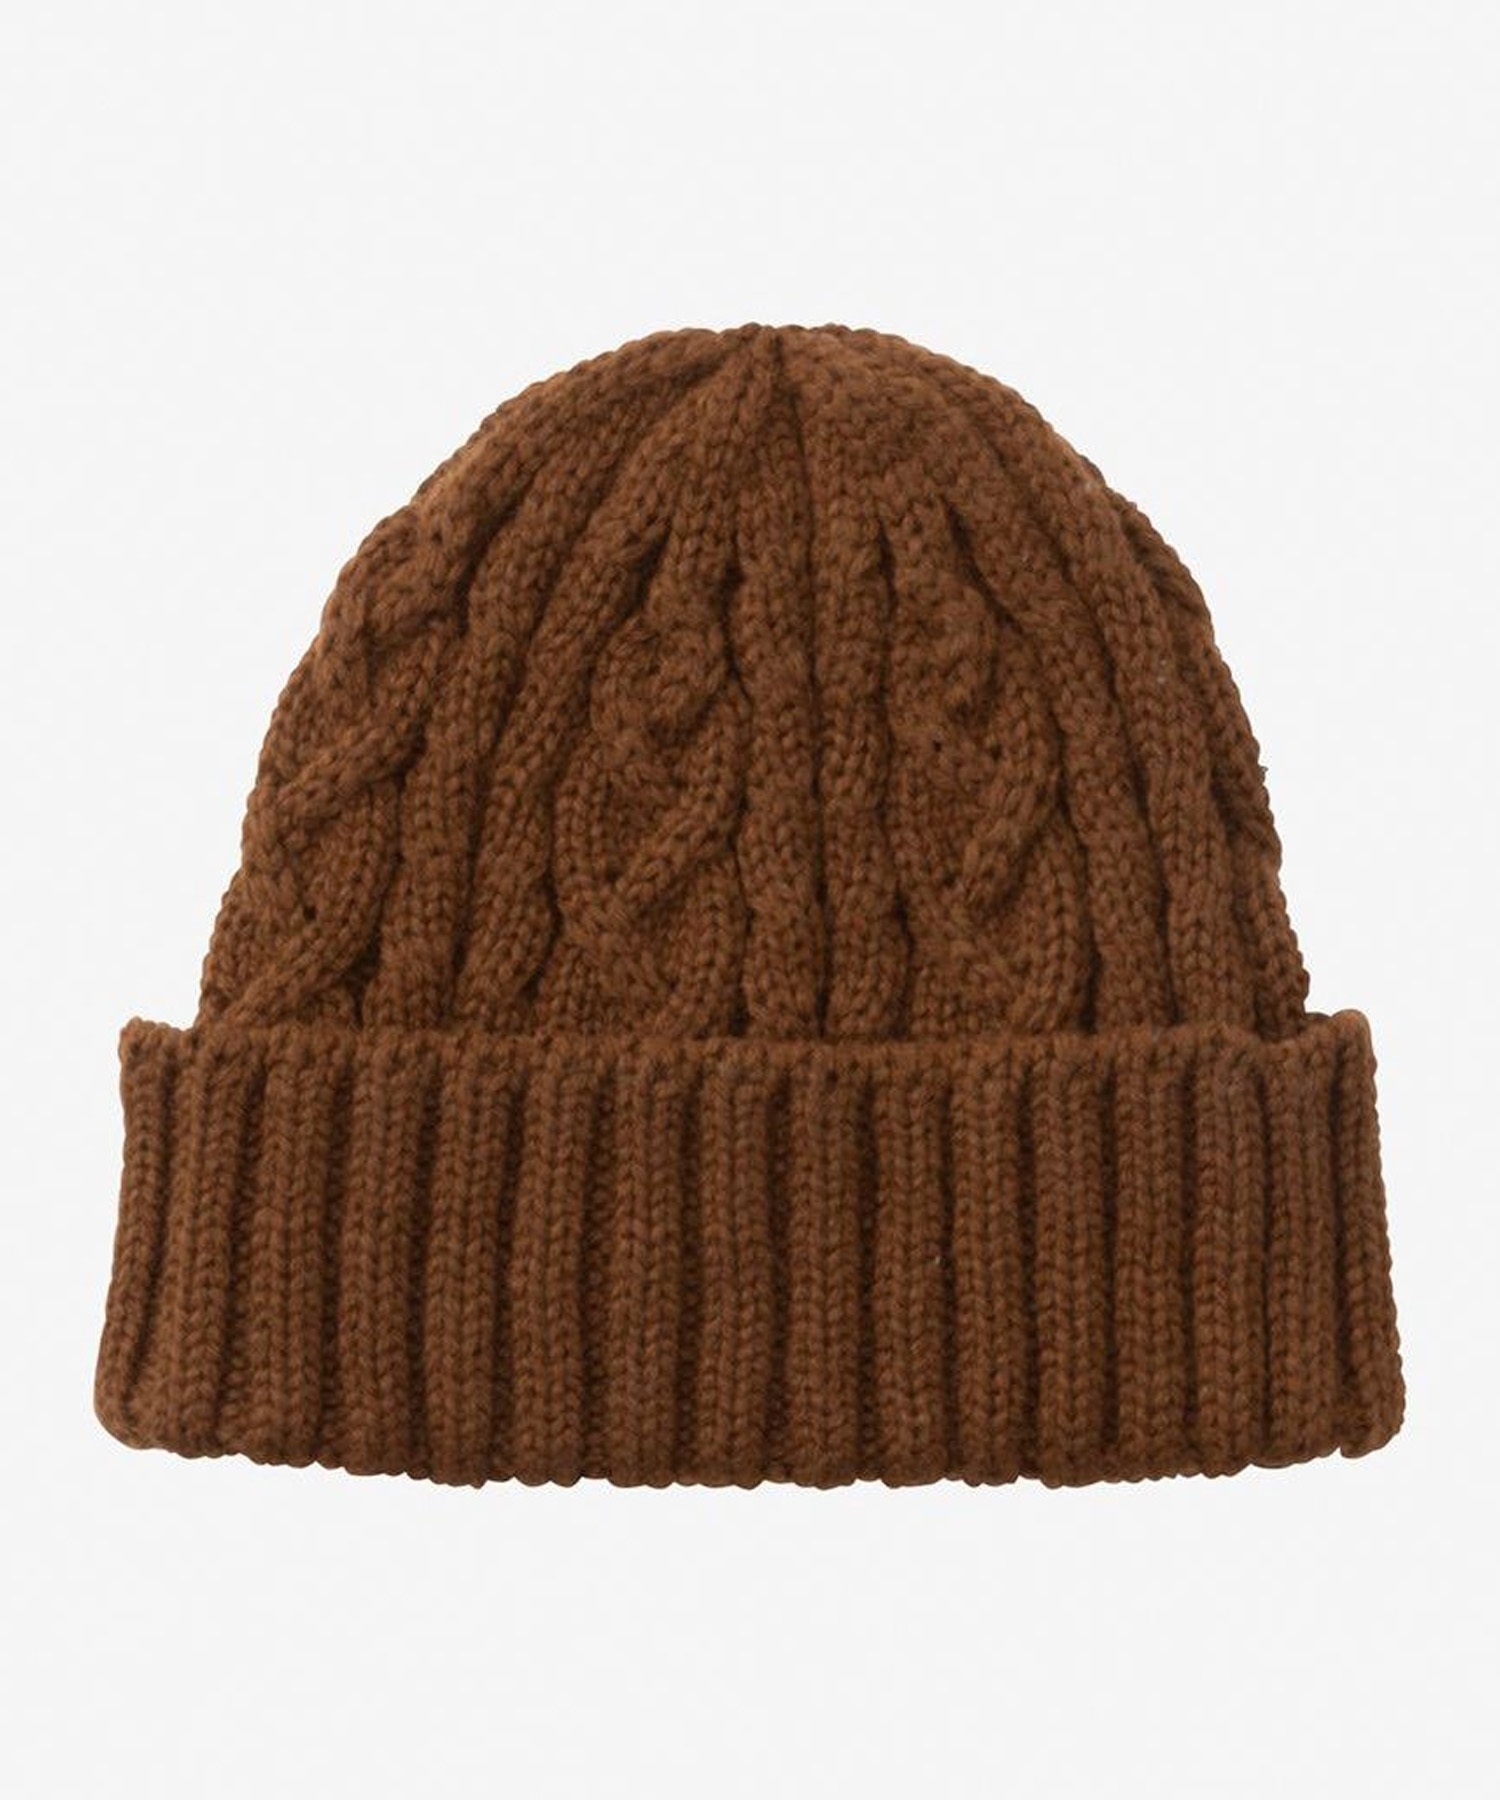 THE NORTH FACE/ザ・ノース・フェイス Kids’ Cable Beanie ケーブルビーニー キッズ ニットキャップ 帽子 カプチーノ NNJ42301 CA(CA-FREE)